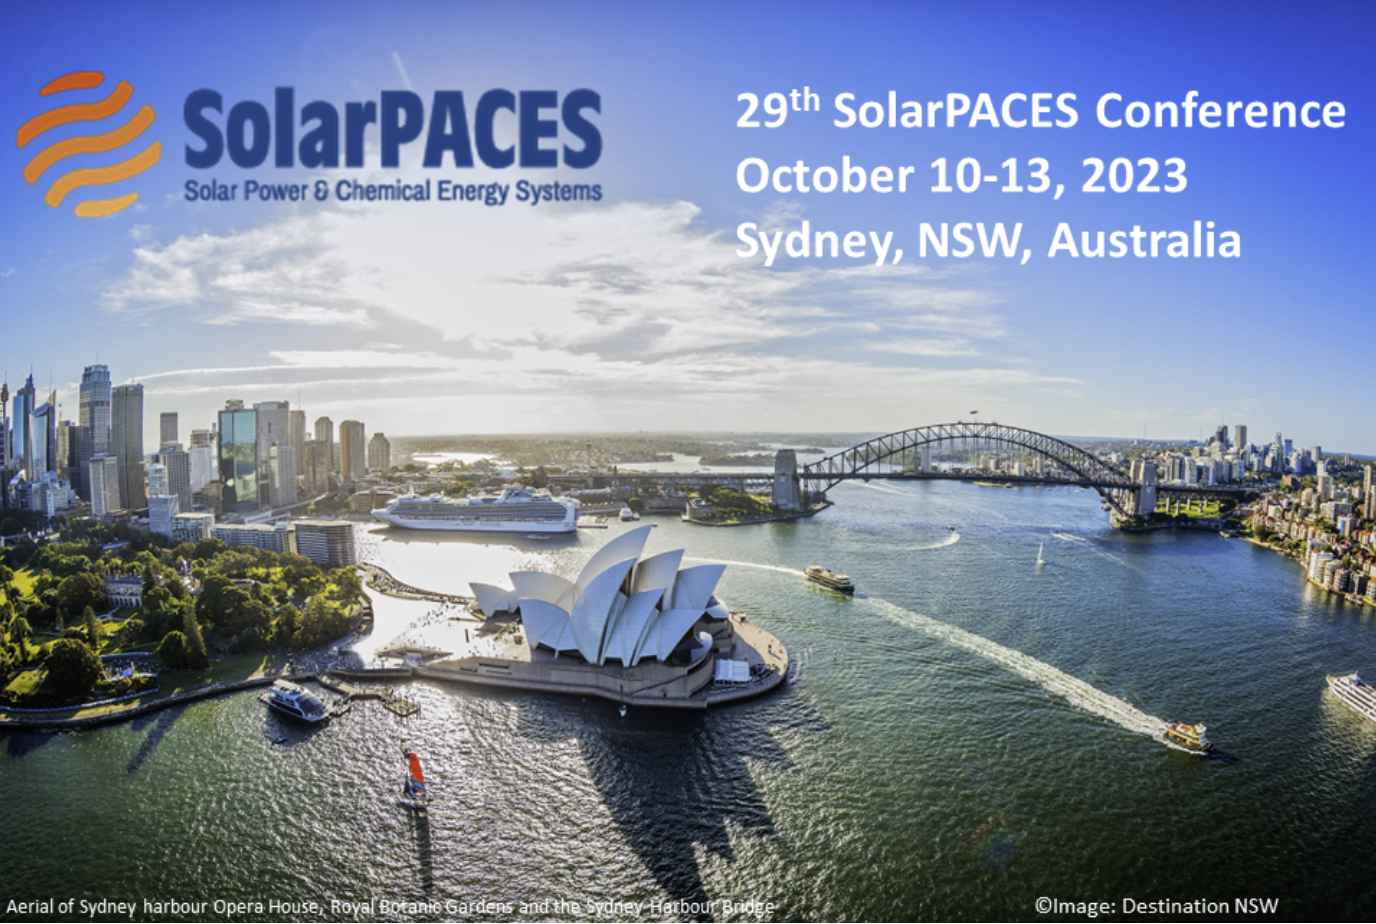 https://www.solarpaces-conference.org/home